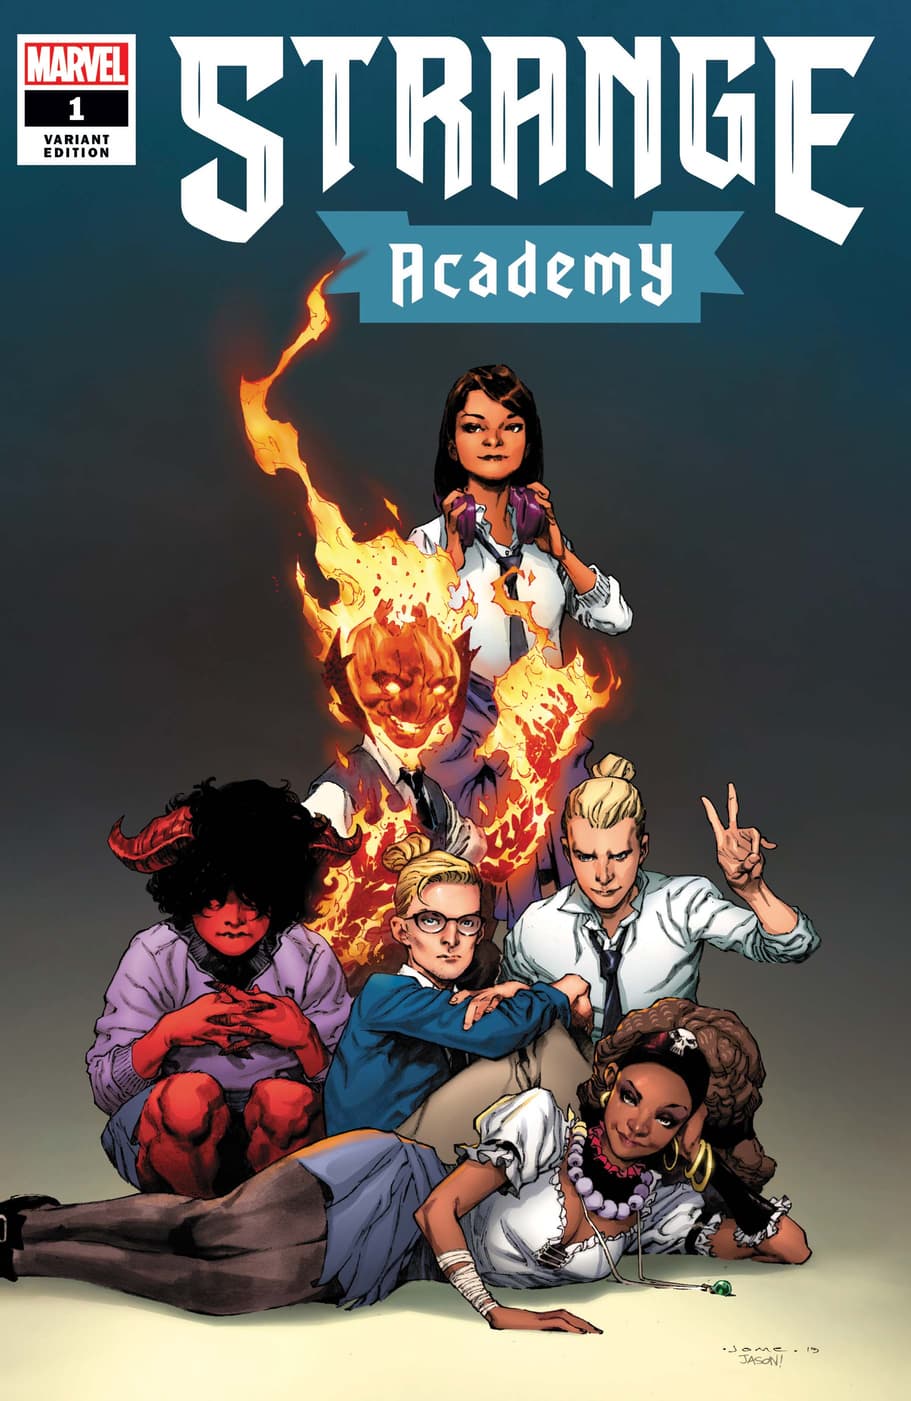 STRANGE ACADEMY #1 variant cover by Jerome Opena